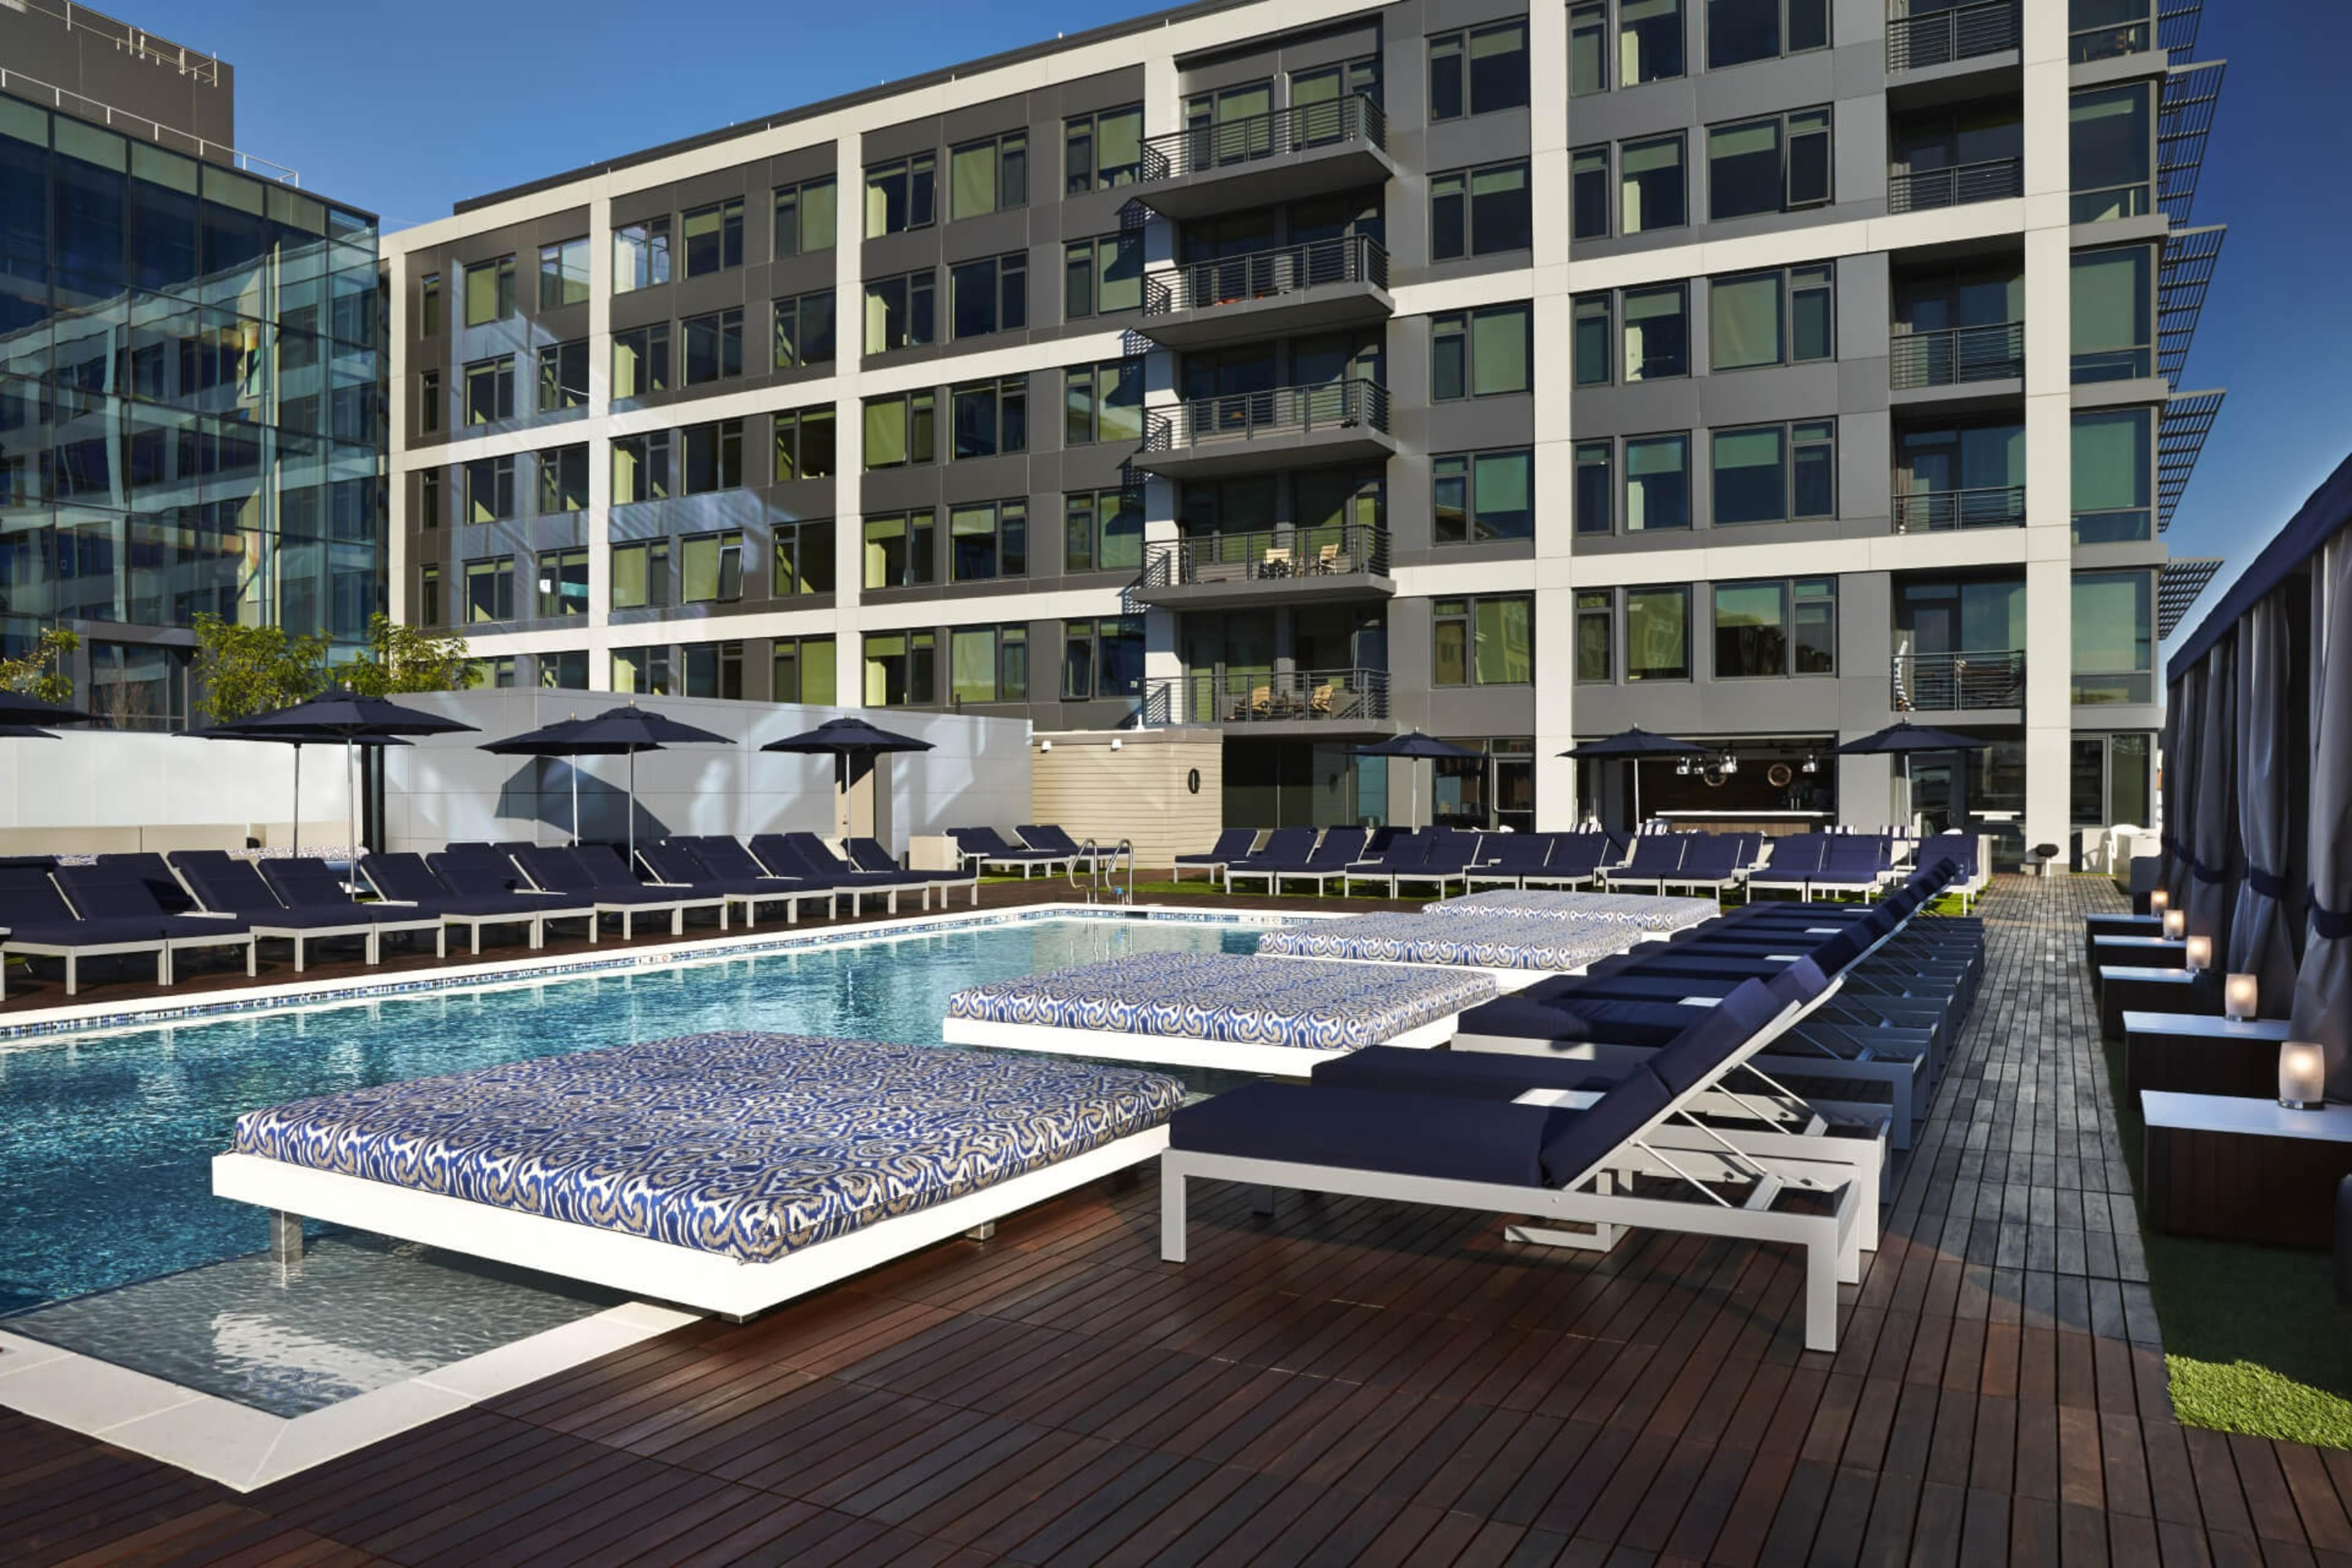 Penthouse Pool Club - The Yards